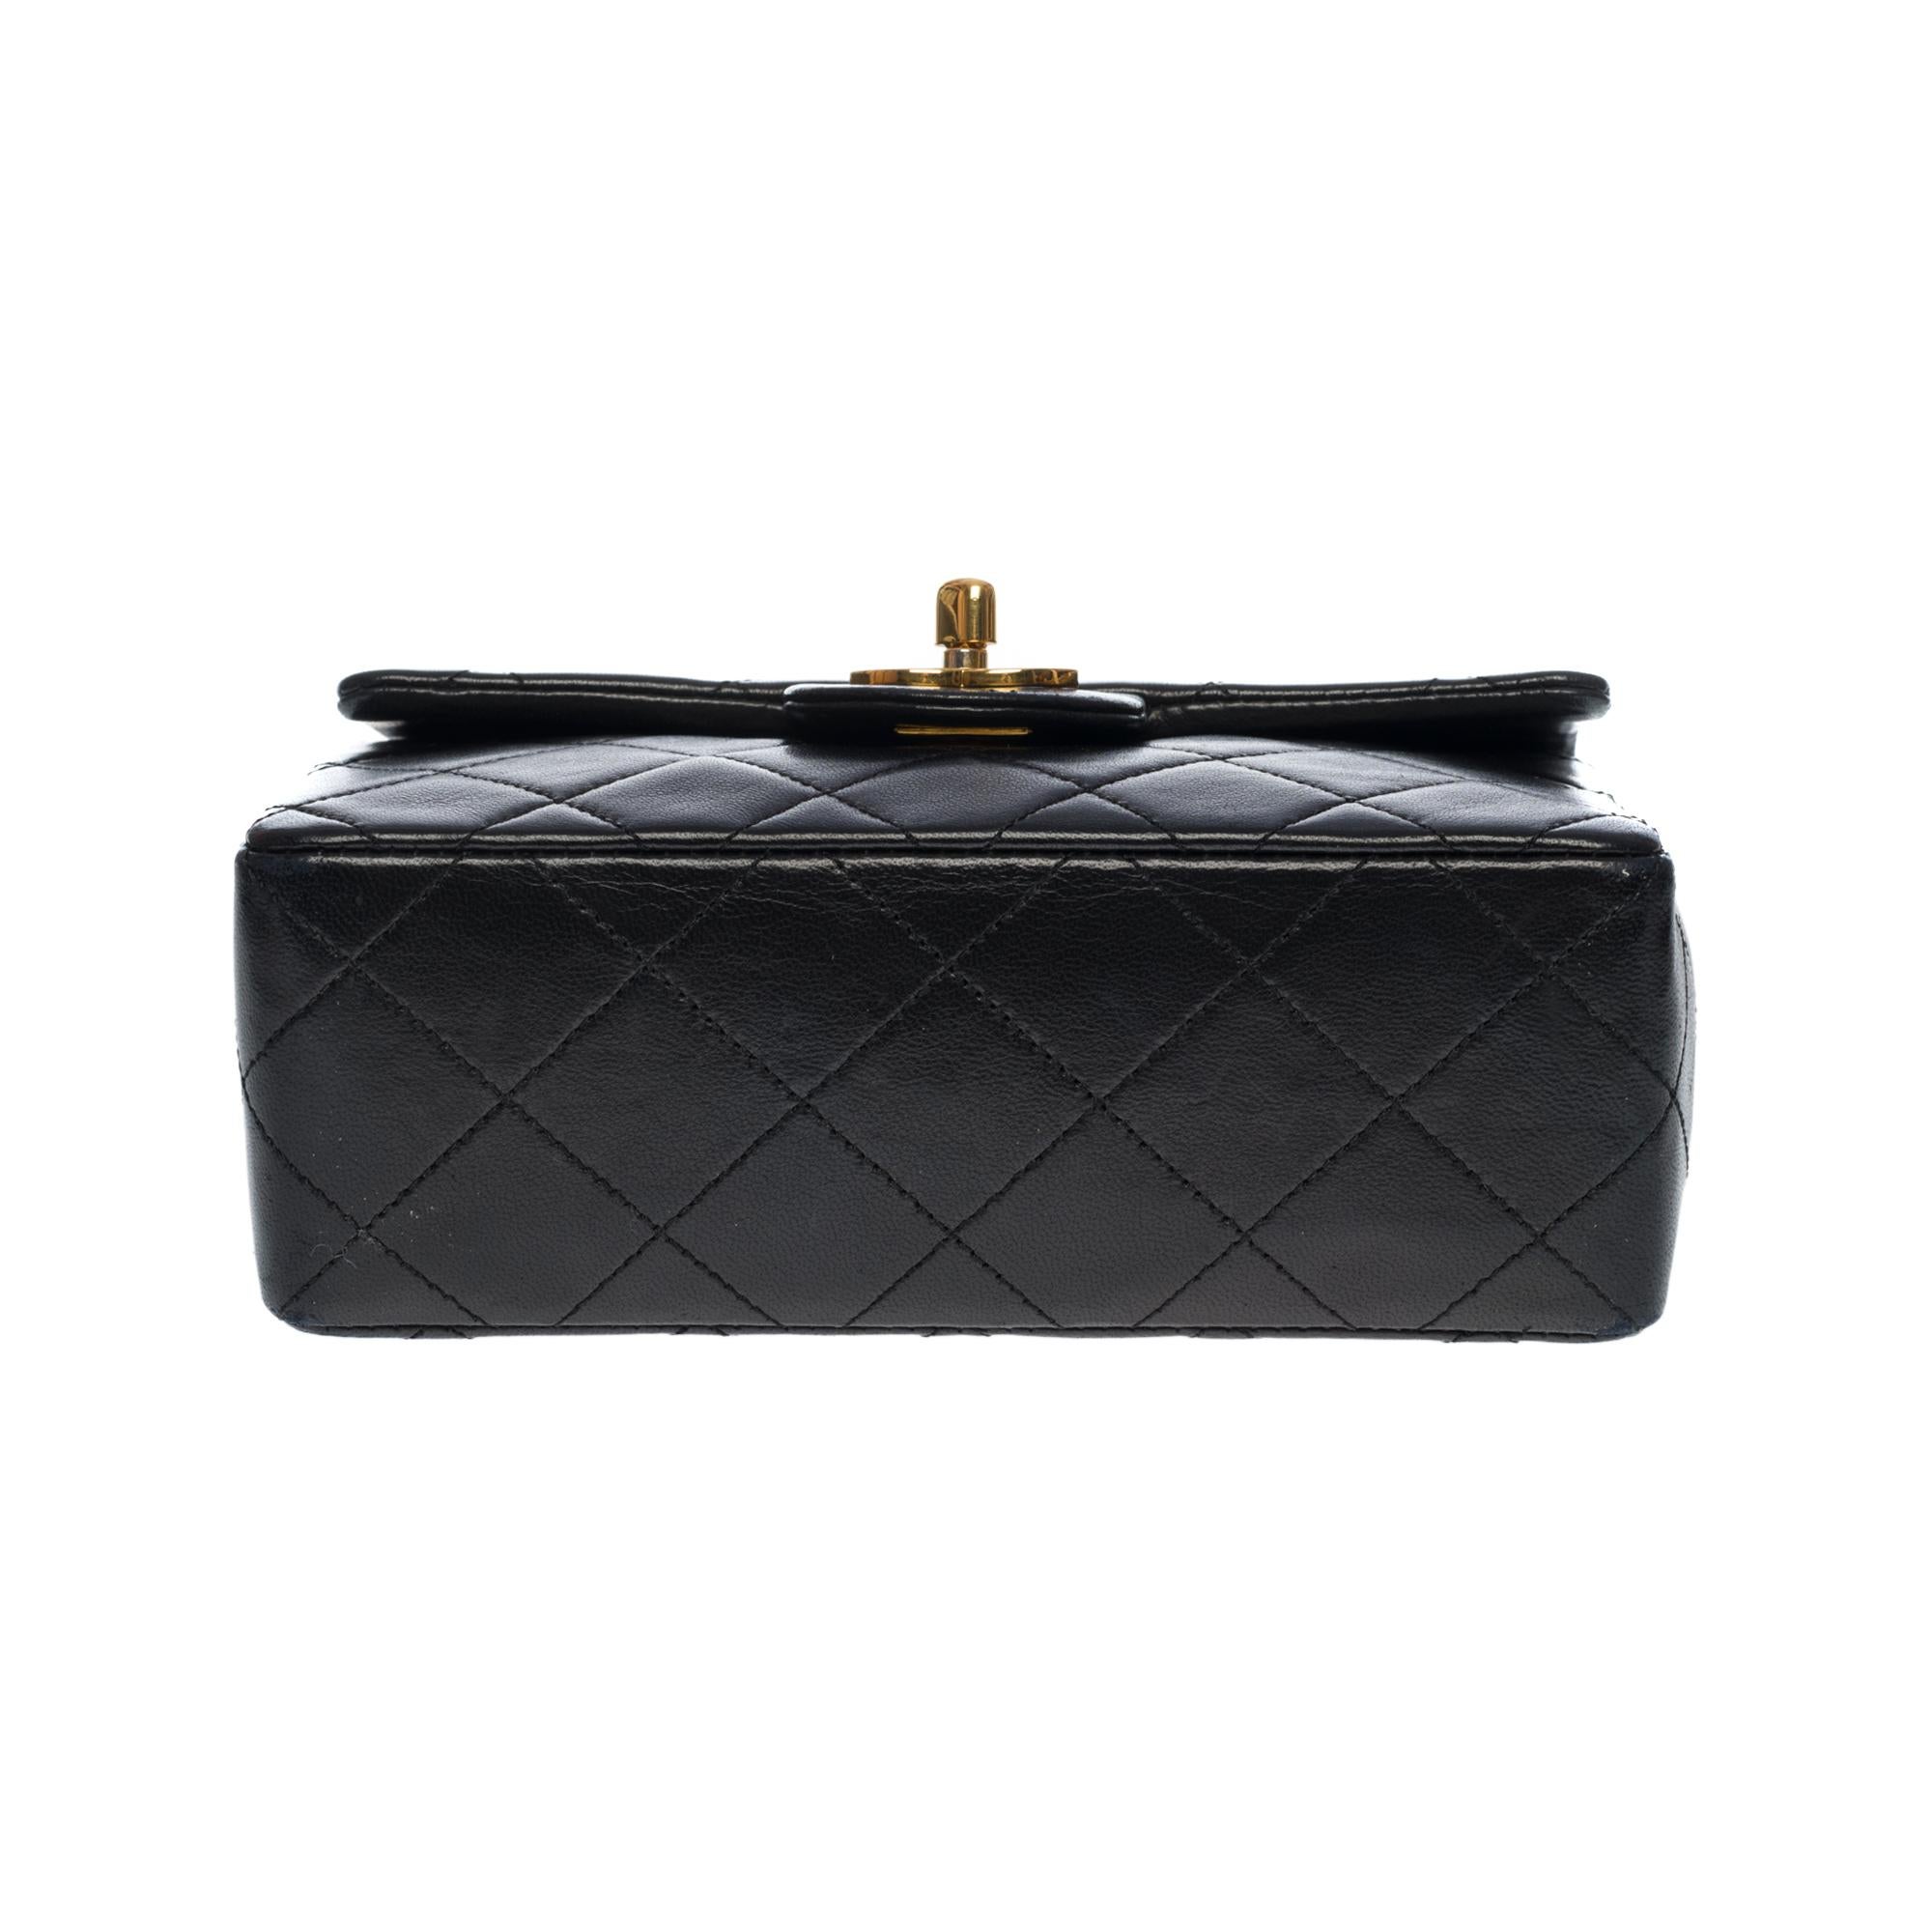 Chanel Mini Timeless flap shoulder bag in black quilted lambskin,  GHW 5